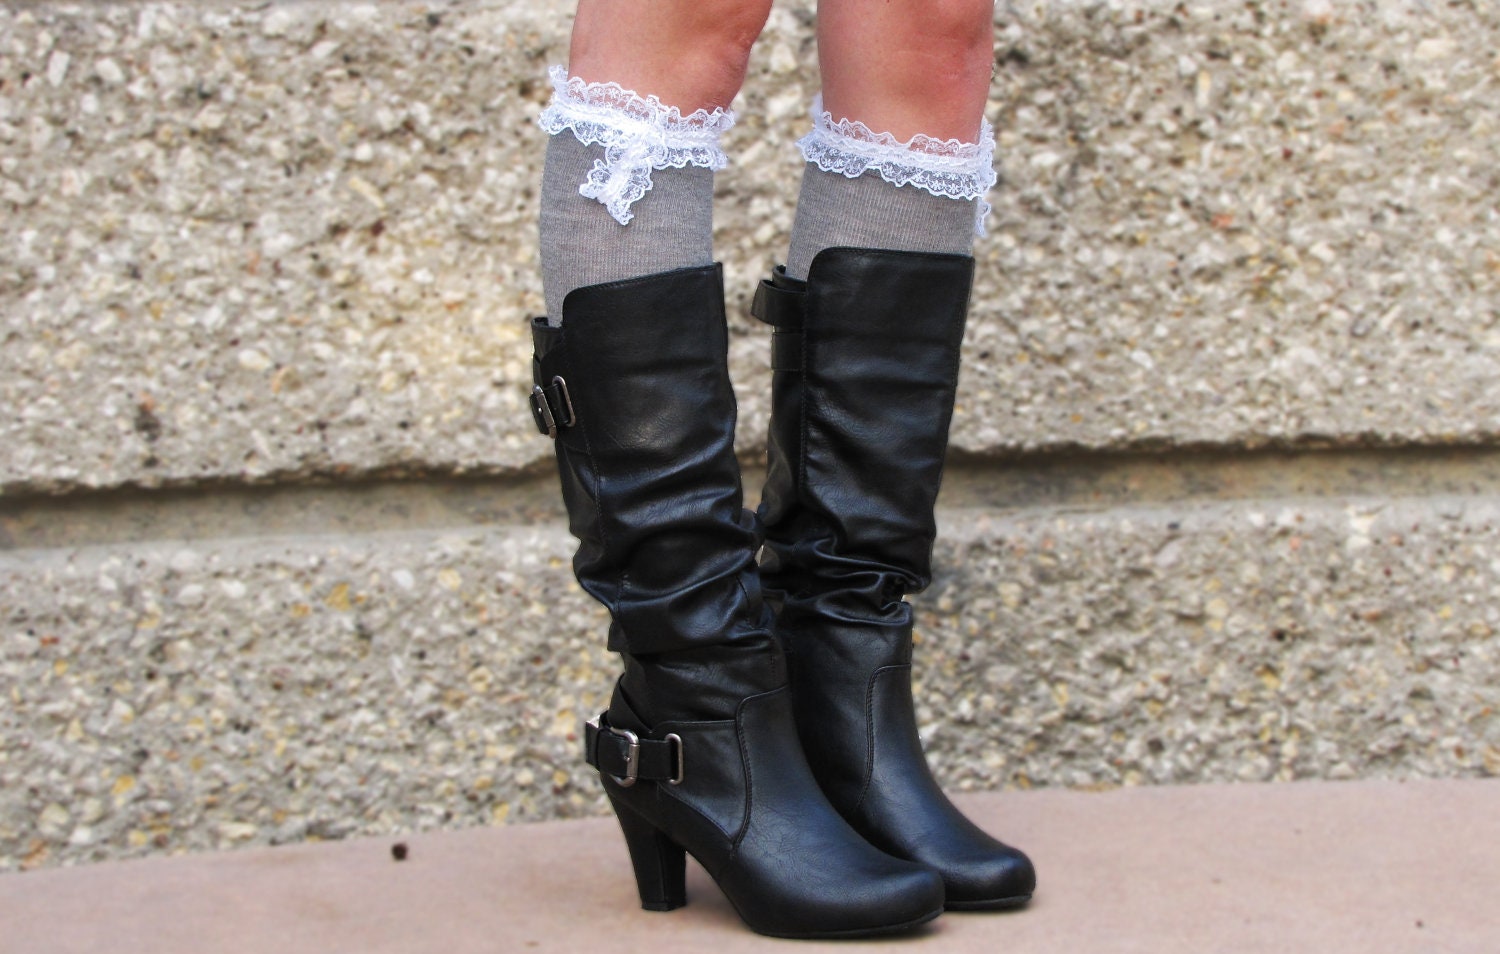 SALE Womenteen Lace Boot Socks With Ruffle Knee High